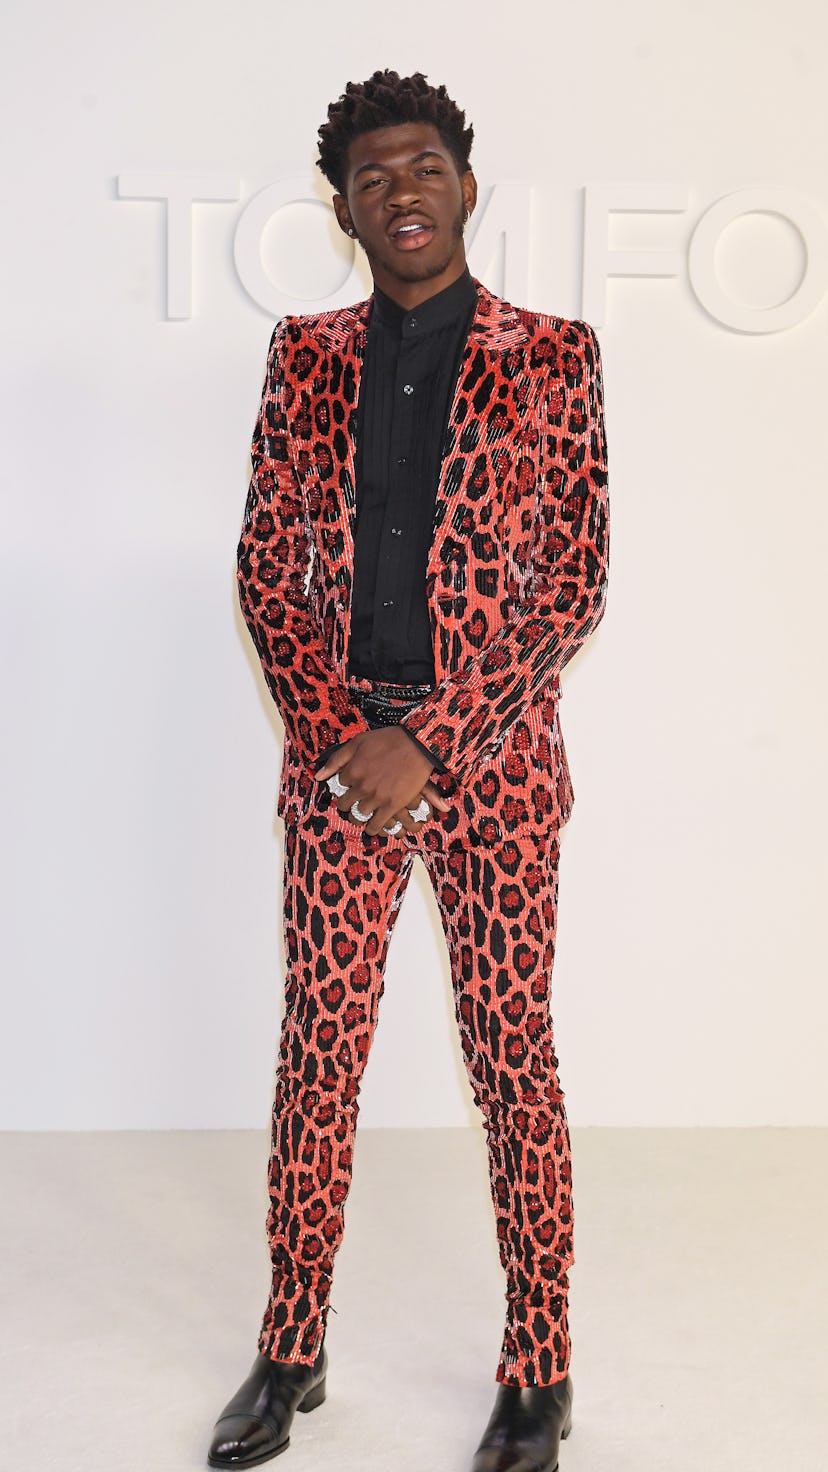 HOLLYWOOD, CALIFORNIA - FEBRUARY 07:  Lil Nas X attends the Tom Ford AW20 show at Milk Studios on Fe...